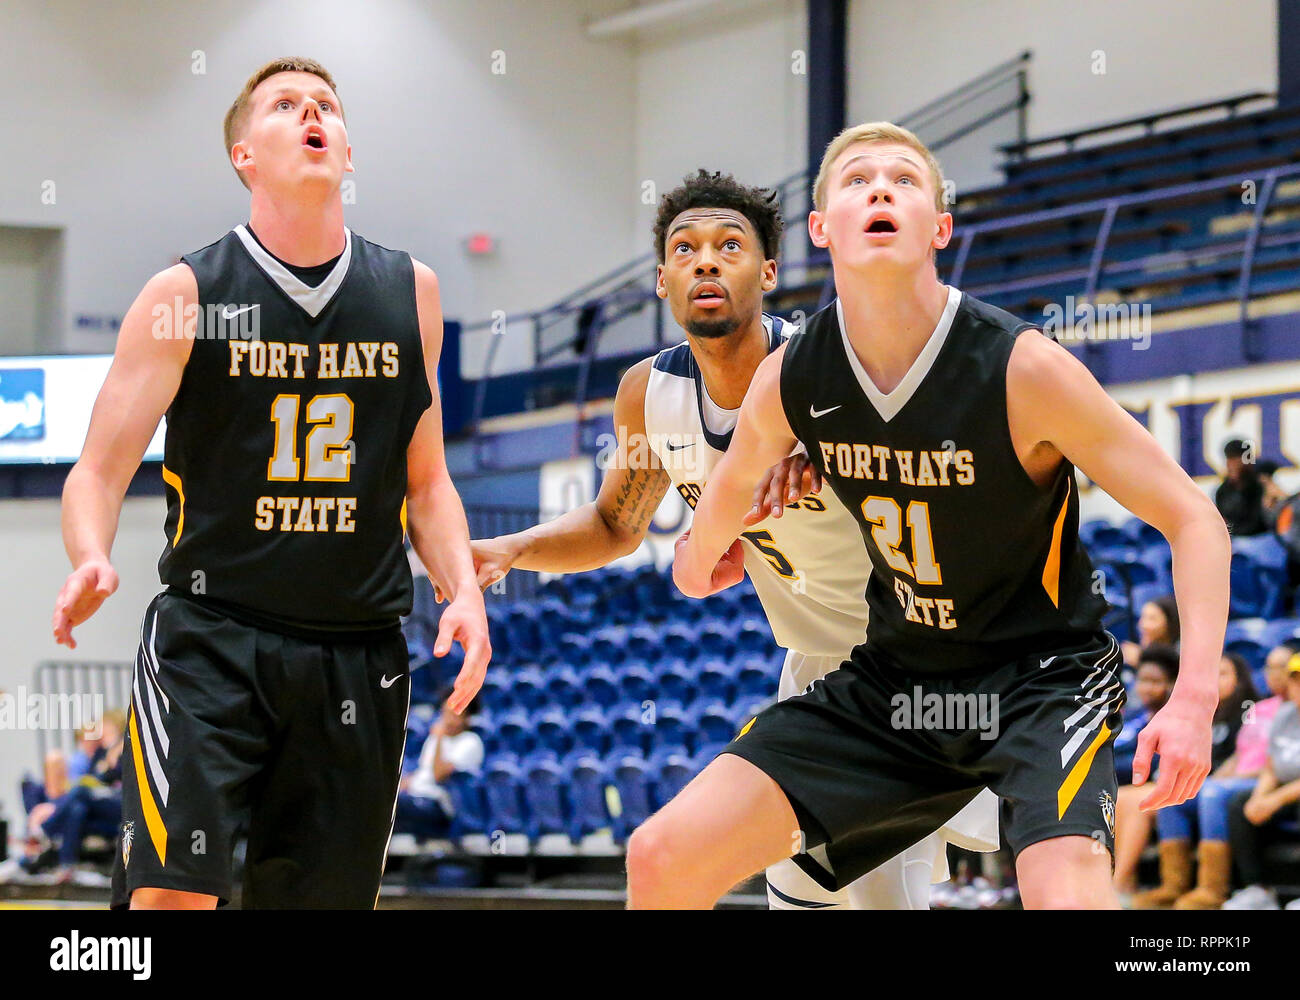 Edmond, OK, USA. 21st Feb, 2019. Fort Hays State Forward Jared Vitztum (21)  and University of Central Oklahoma Guard Jordan Hemphill (5) position for a  rebound during a basketball game between the